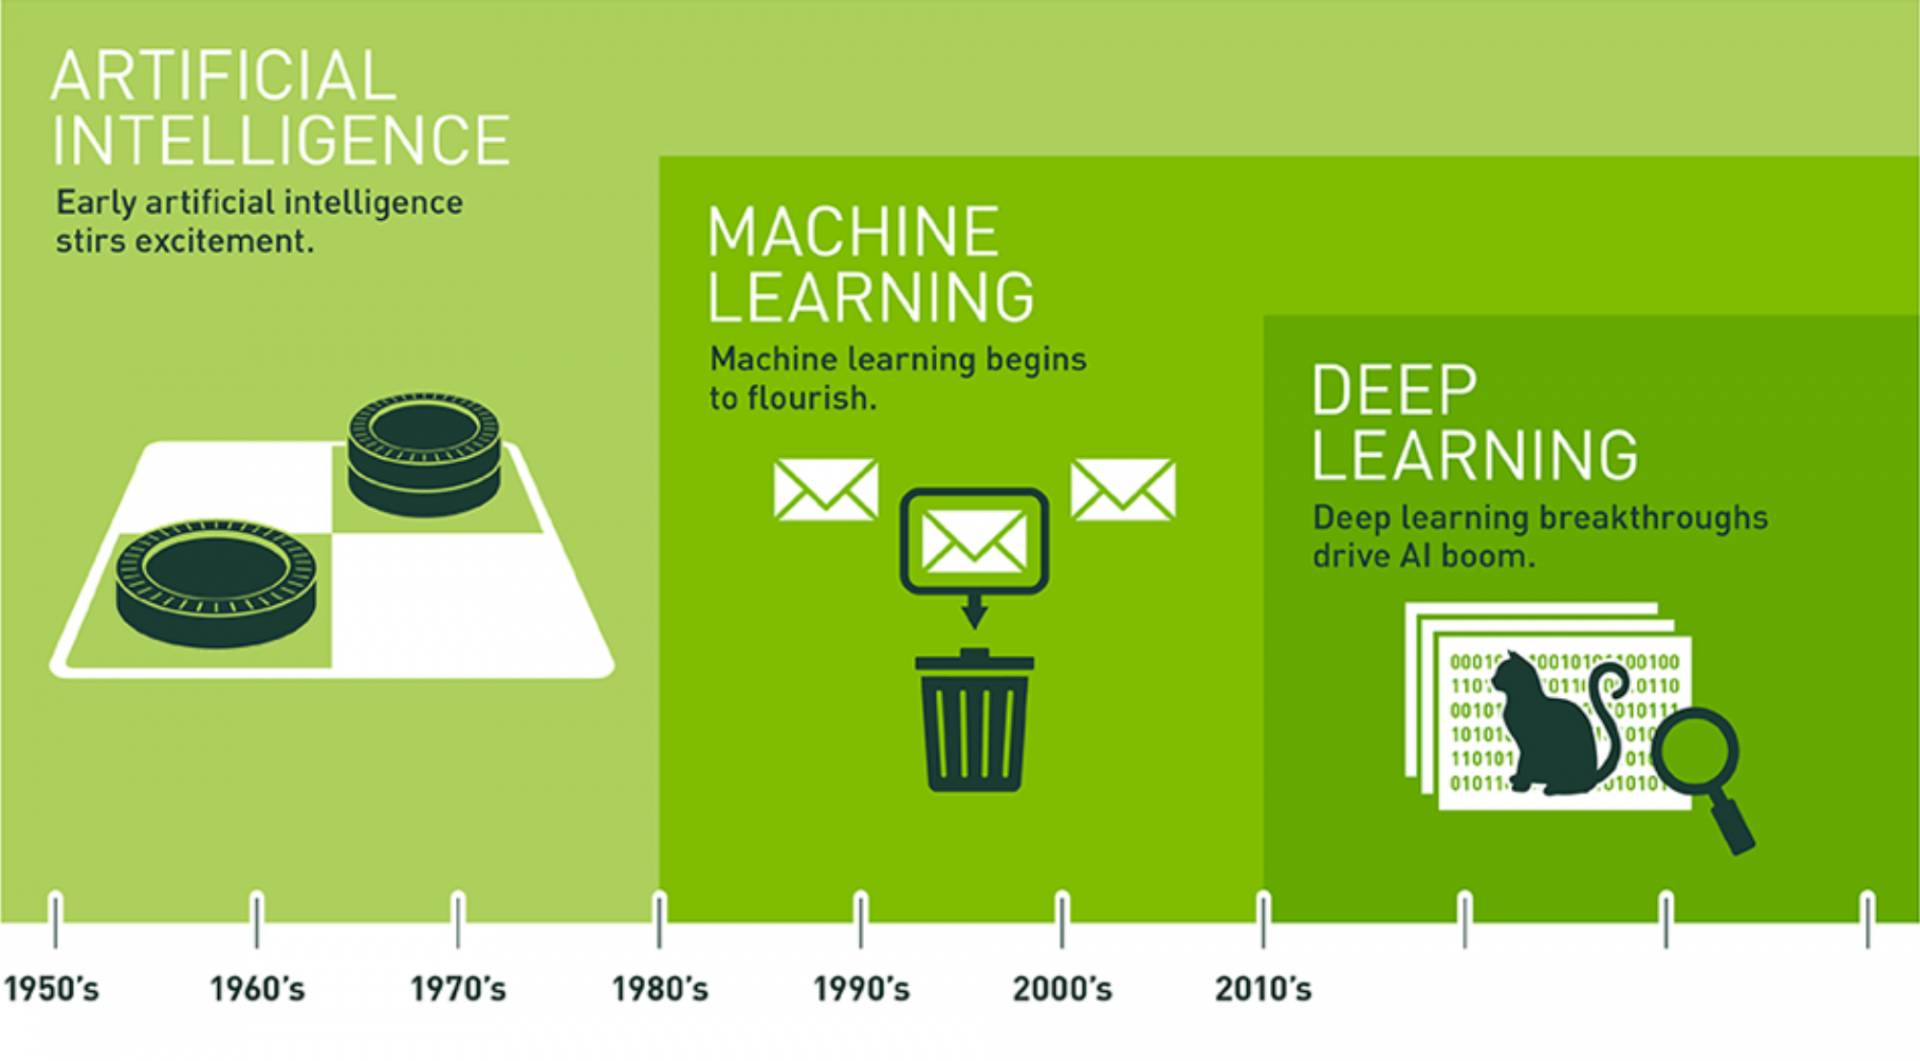 Infographic showing timeline from artificial intelligence to machine learning to deep learning from the 1950s to the 2010s